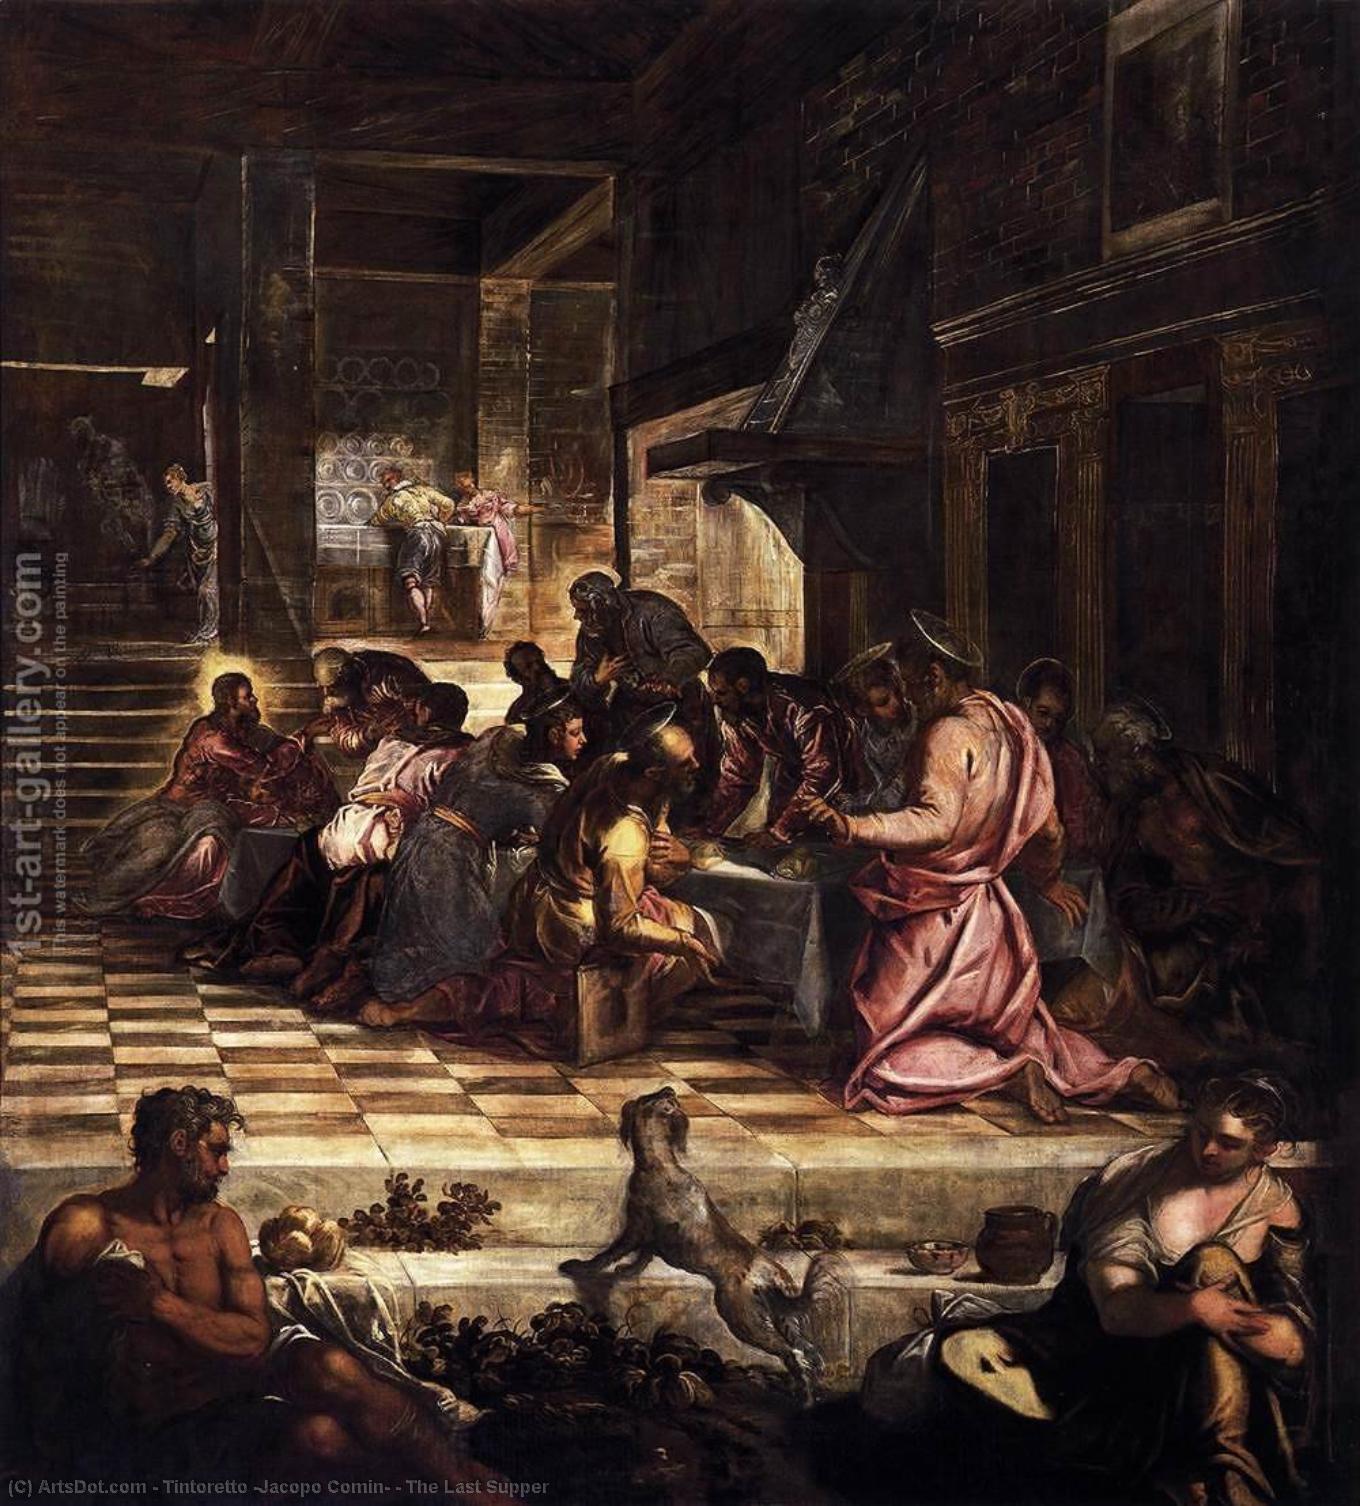 Order Paintings Reproductions The Last Supper, 1579 by Tintoretto (Jacopo Comin) (1518-1594, Italy) | ArtsDot.com